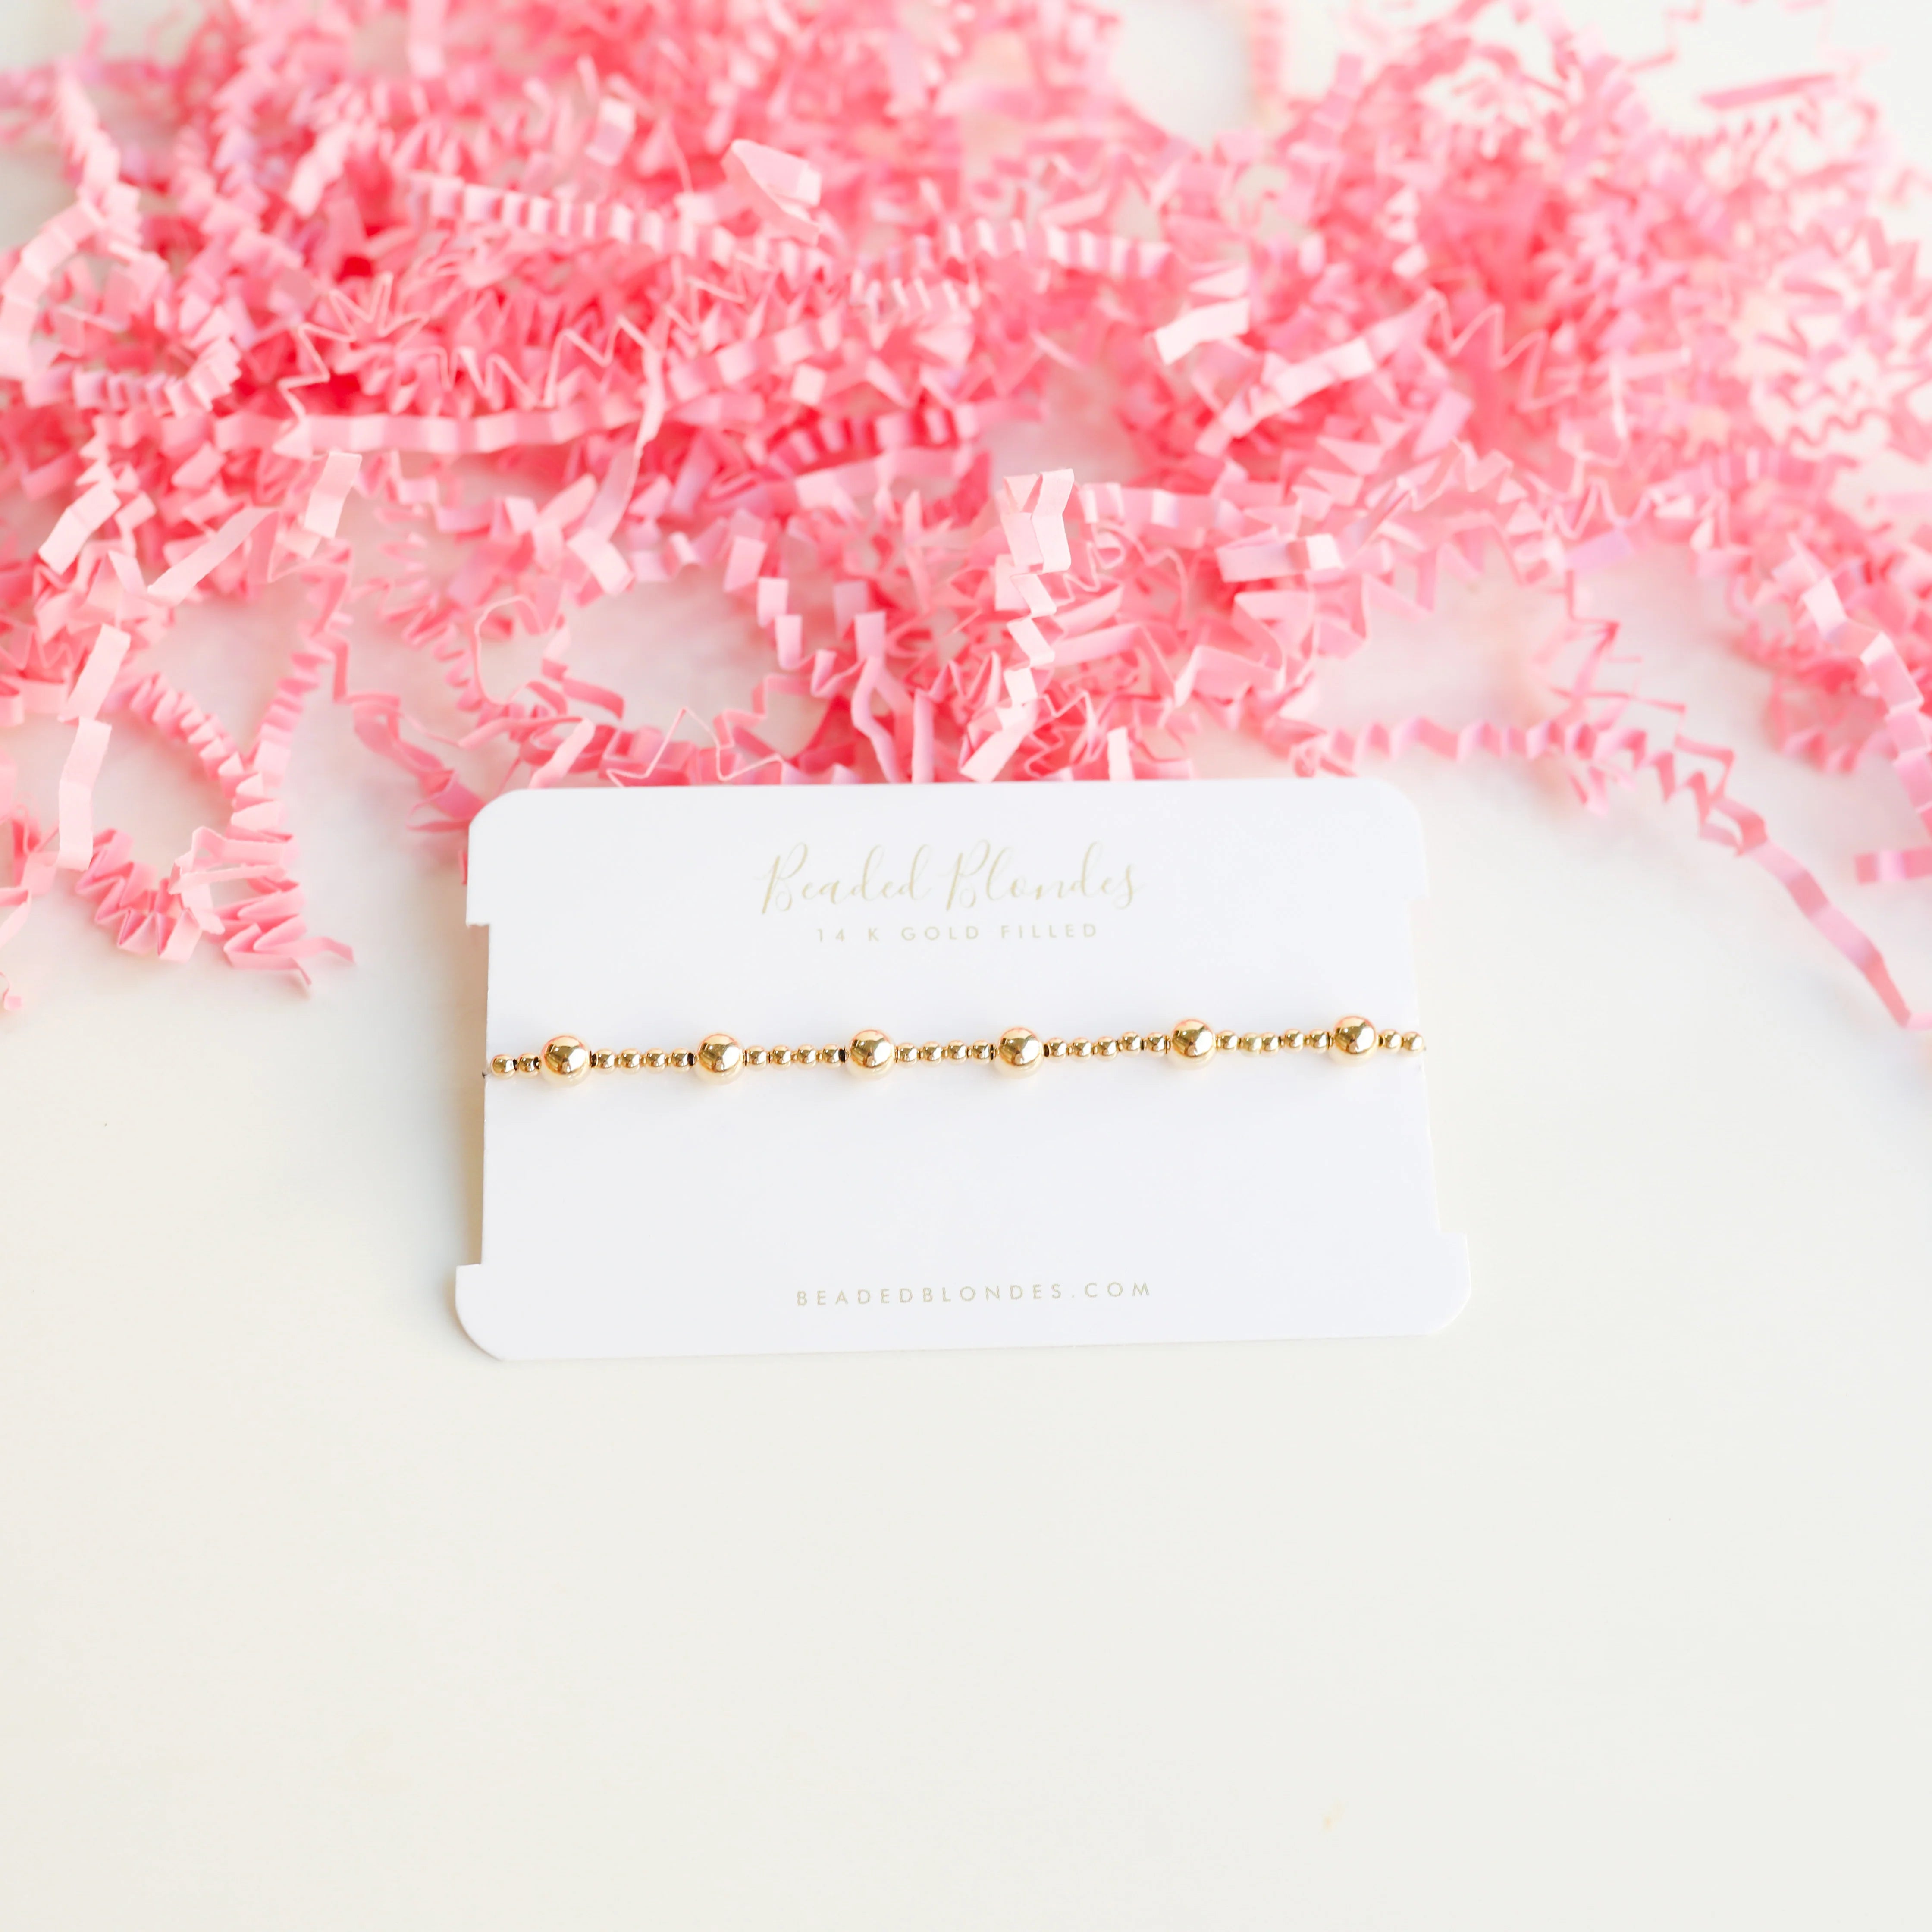 Beaded Blondes | Lively Bracelet in Gold - Giddy Up Glamour Boutique